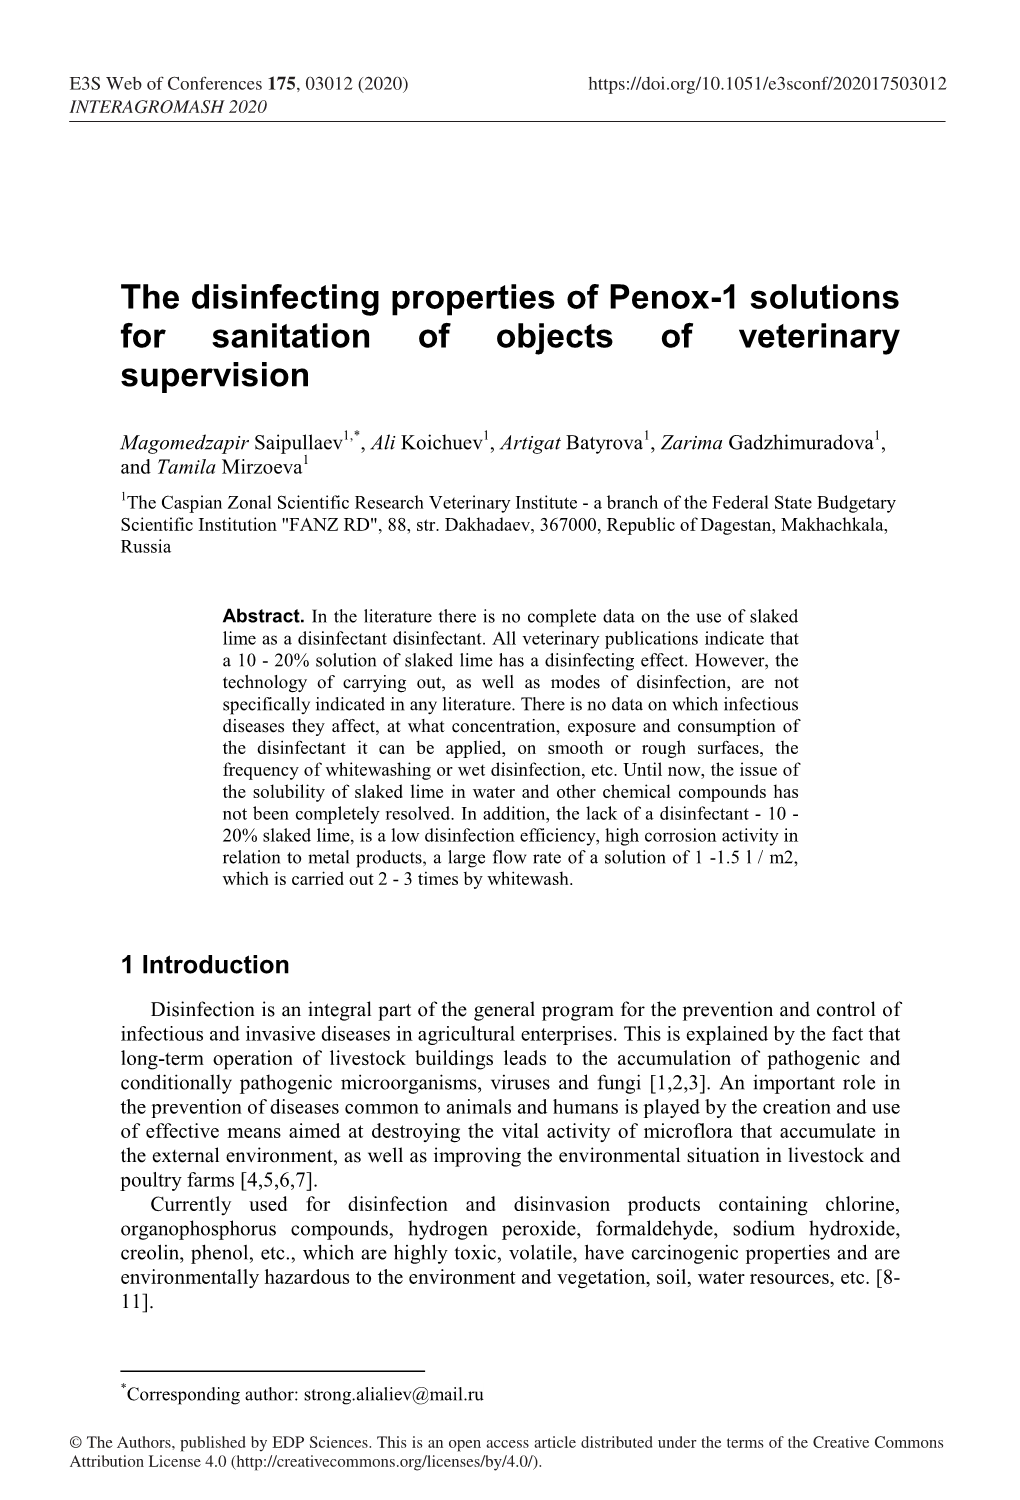 The Disinfecting Properties of Penox-1 Solutions for Sanitation of Objects of Veterinary Supervision